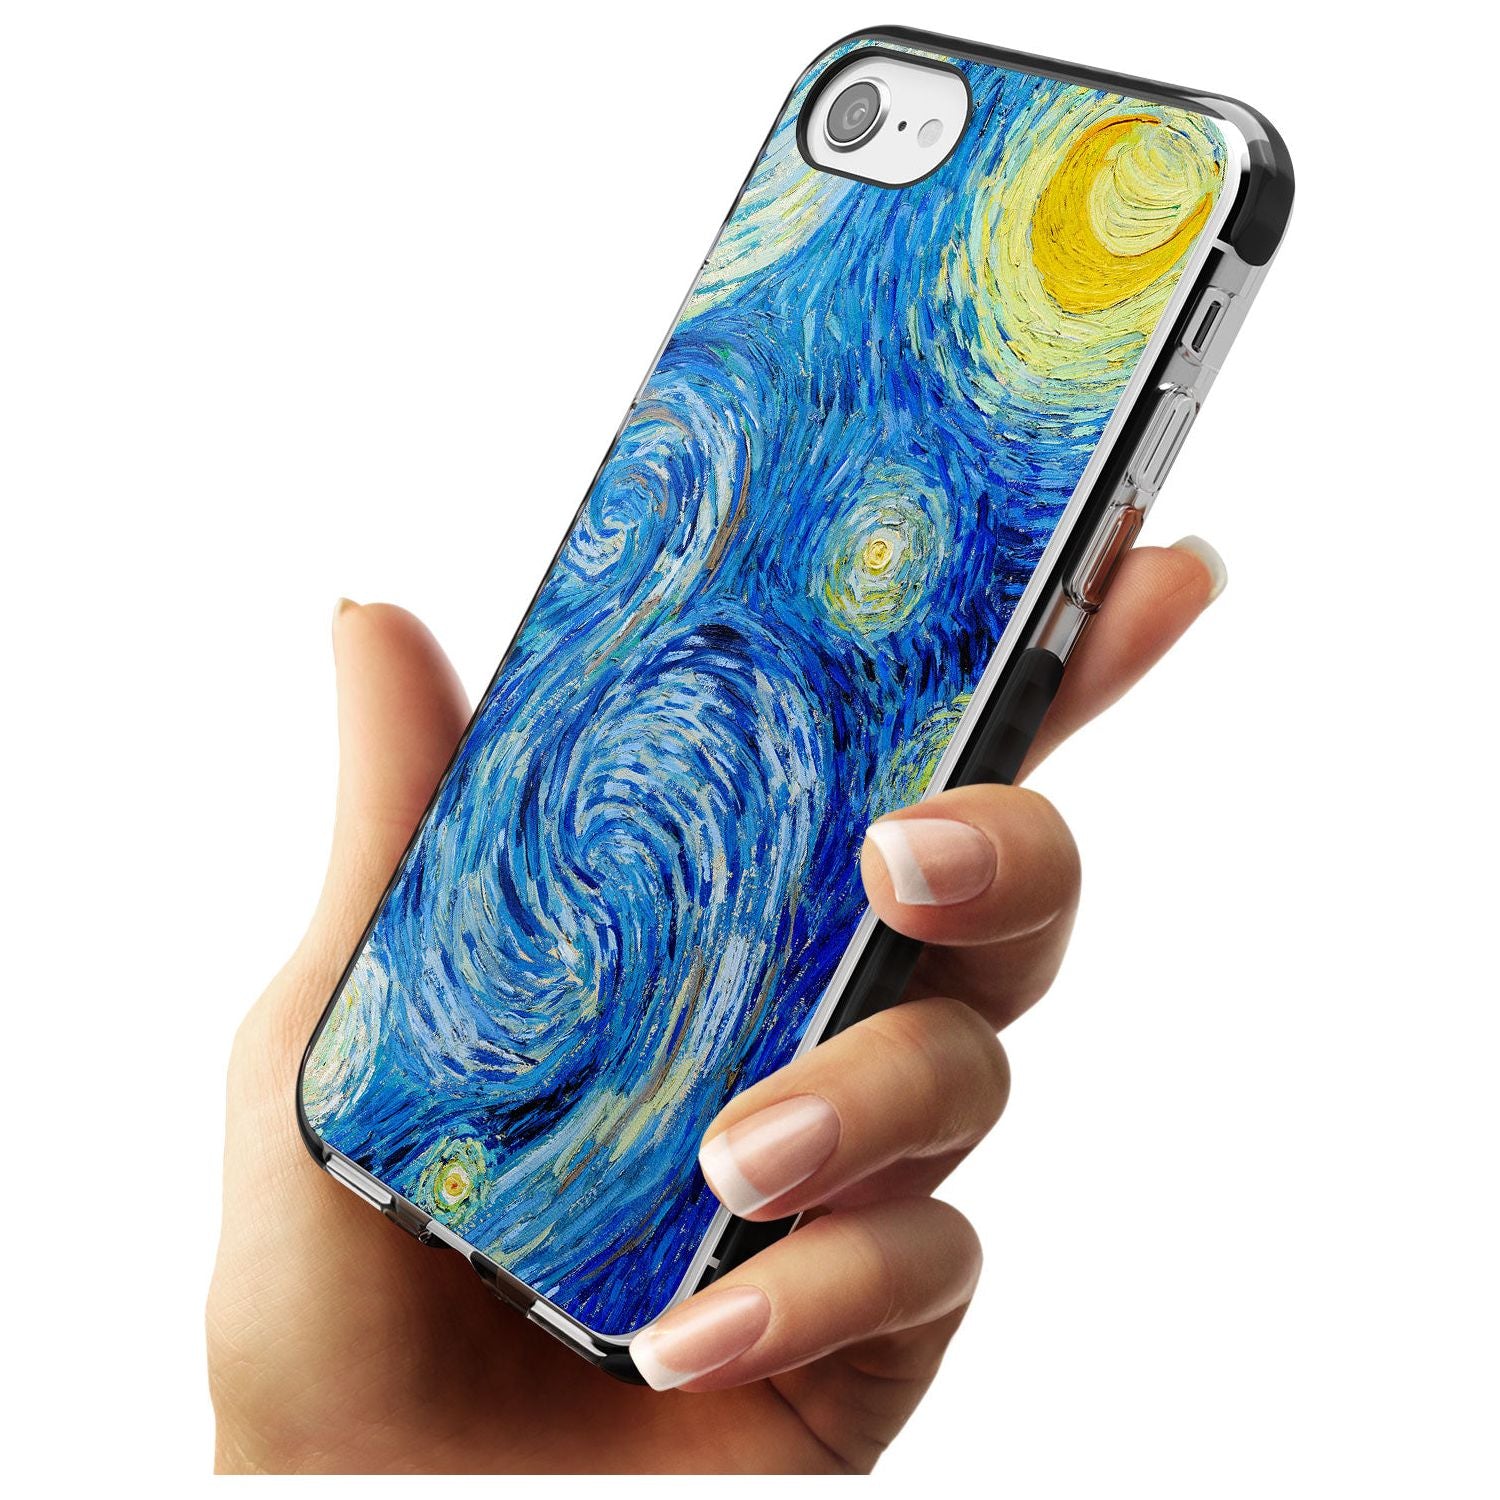 The Starry Night by Vincent Van Gogh Pink Fade Impact Phone Case for iPhone SE 8 7 Plus